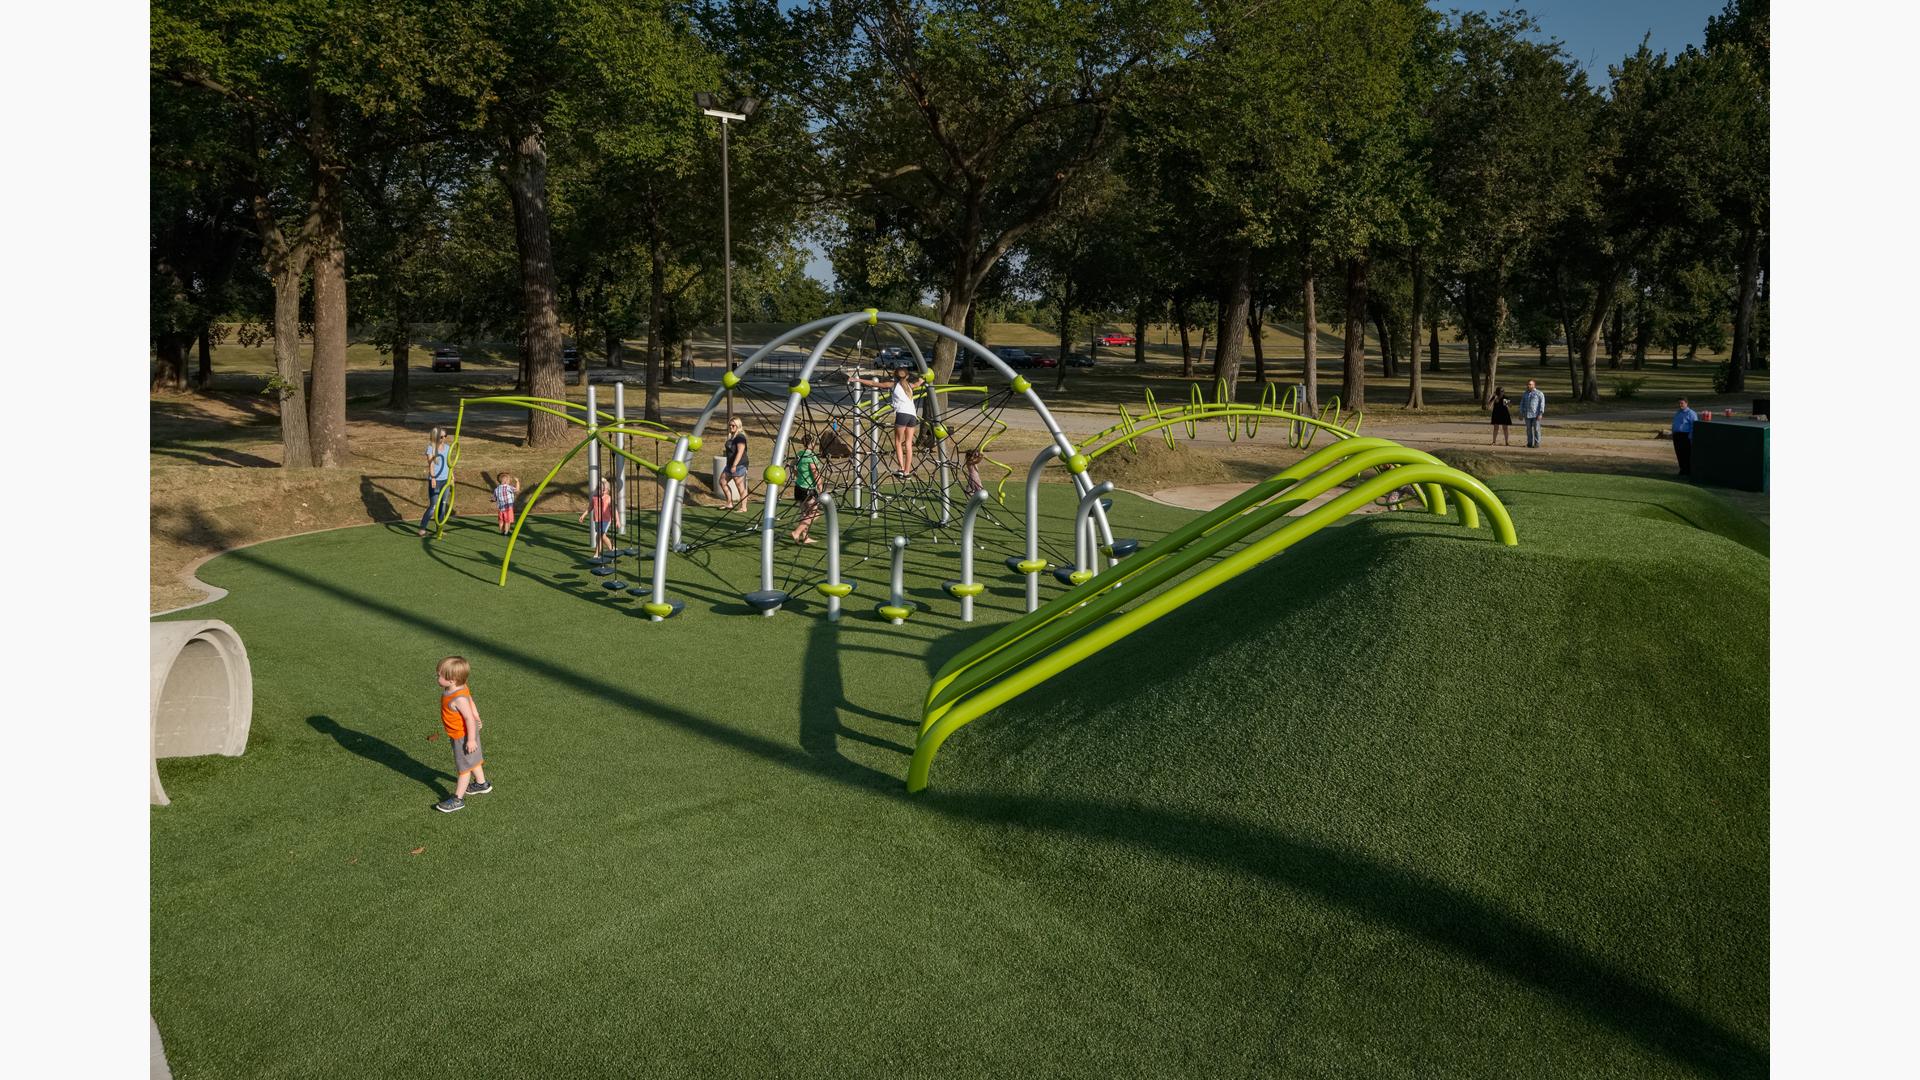 Children climb and play on the ropes of a unique play structure with additional connected spinners, bridges, climbers, and artificial grass underfoot.